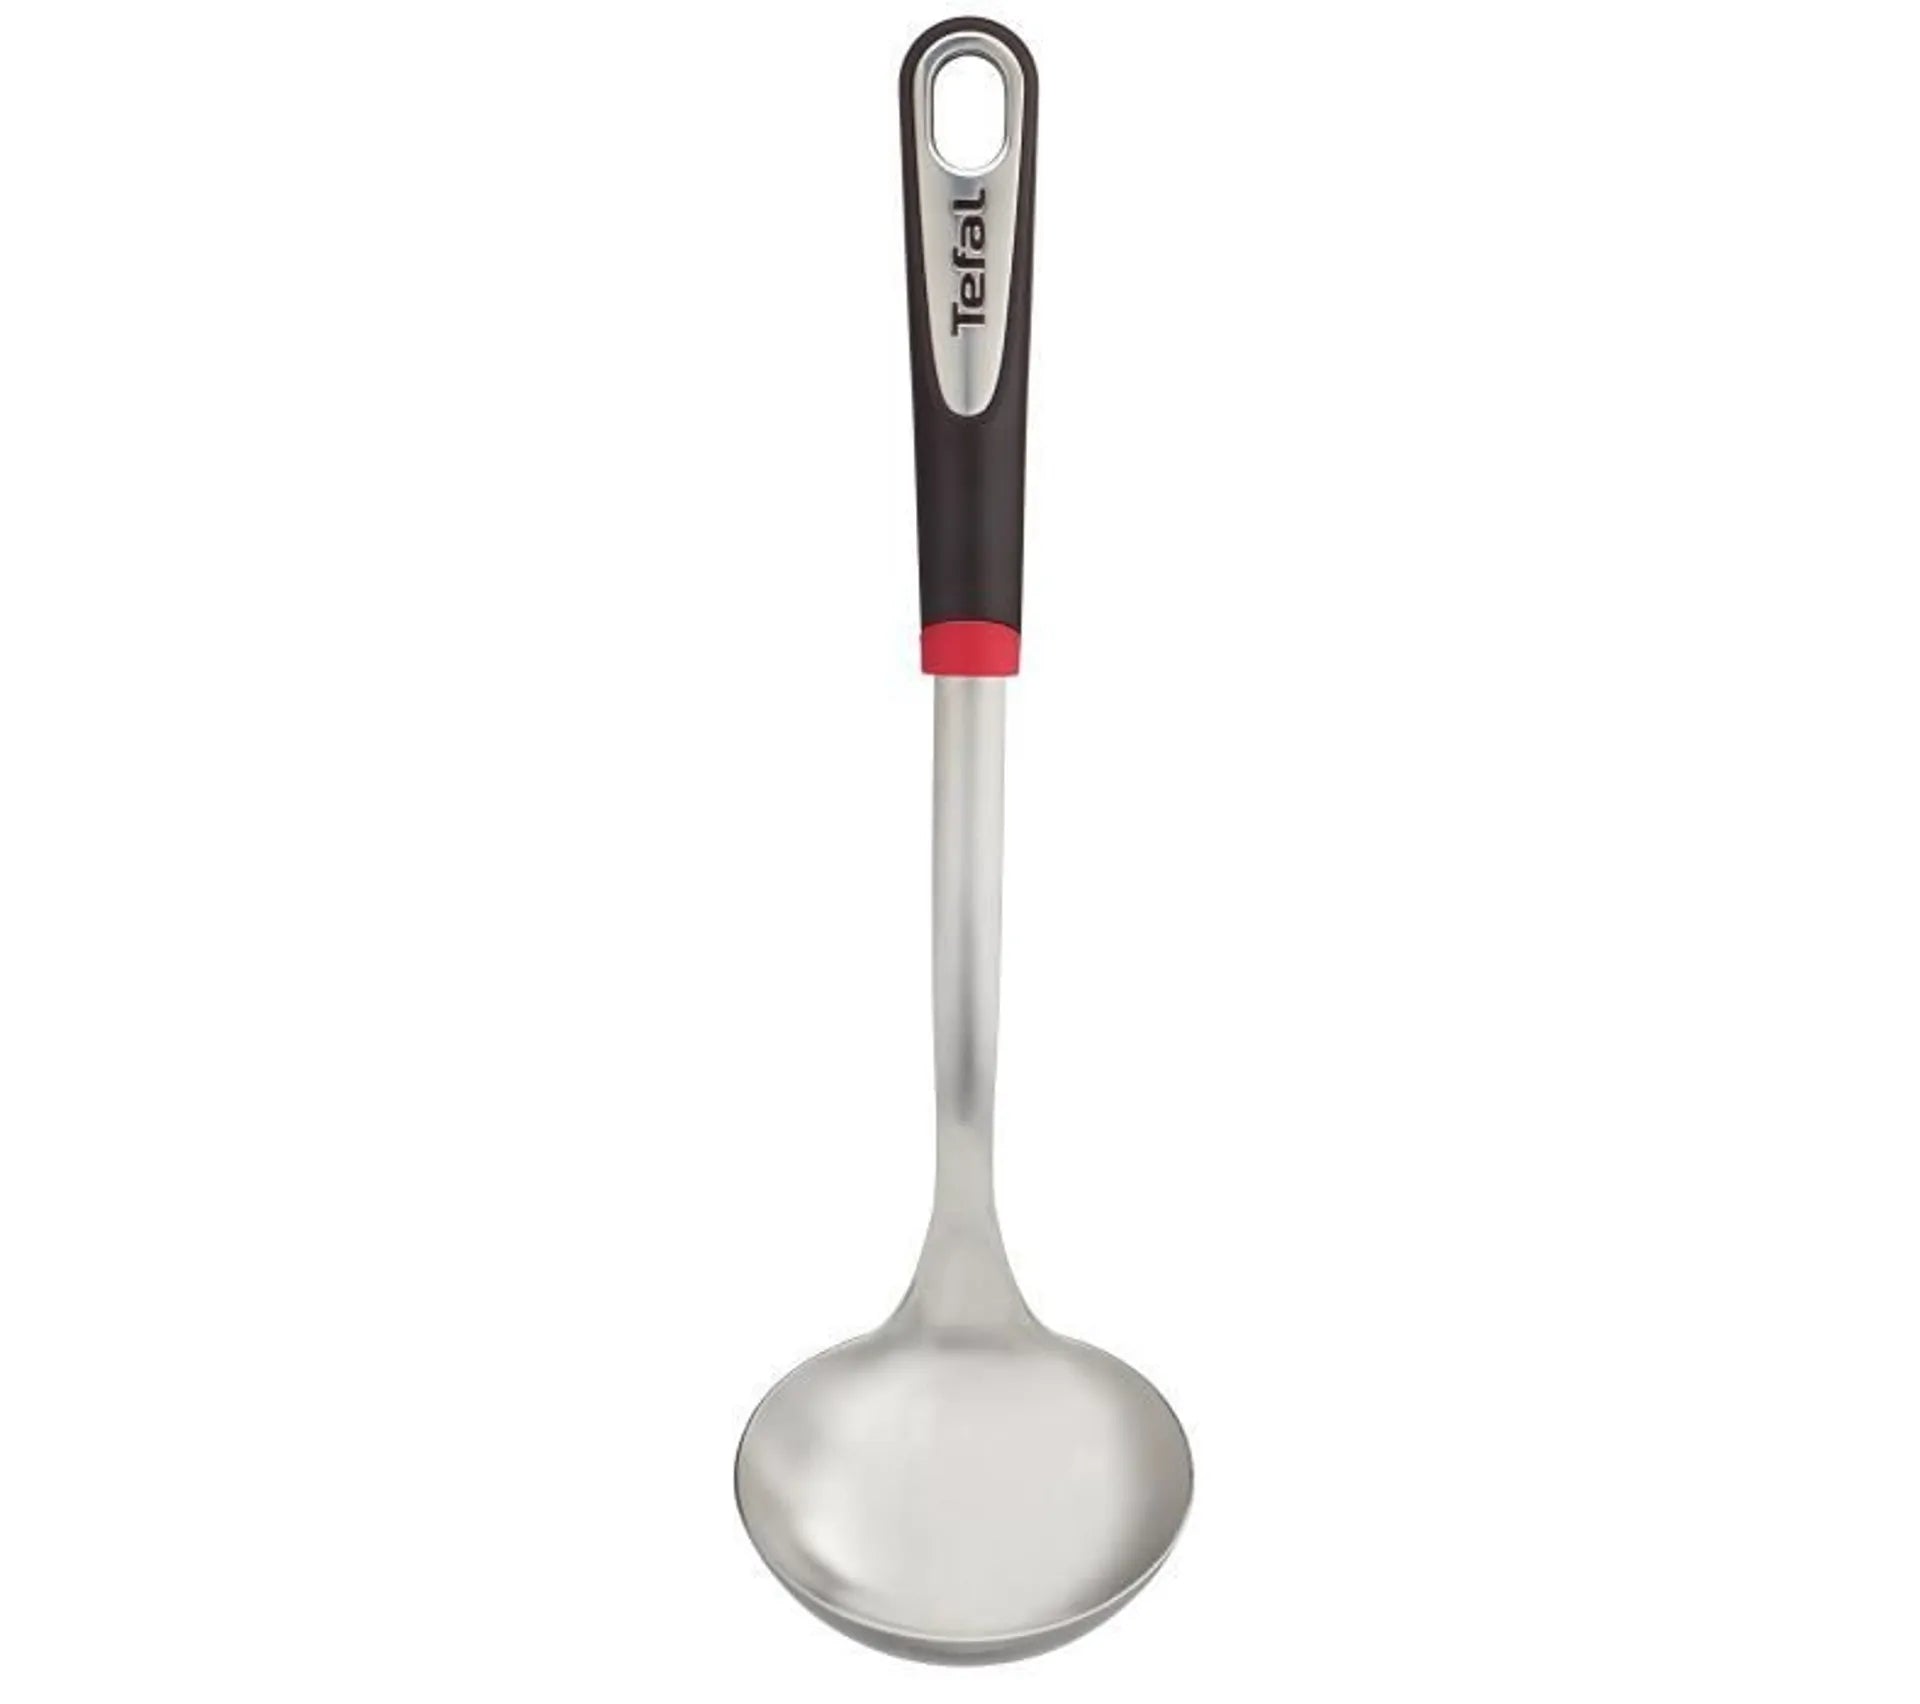 Tefal Ingenio Stainless Steel Ladle / K1180214 - Karout Online -Karout Online Shopping In lebanon - Karout Express Delivery 